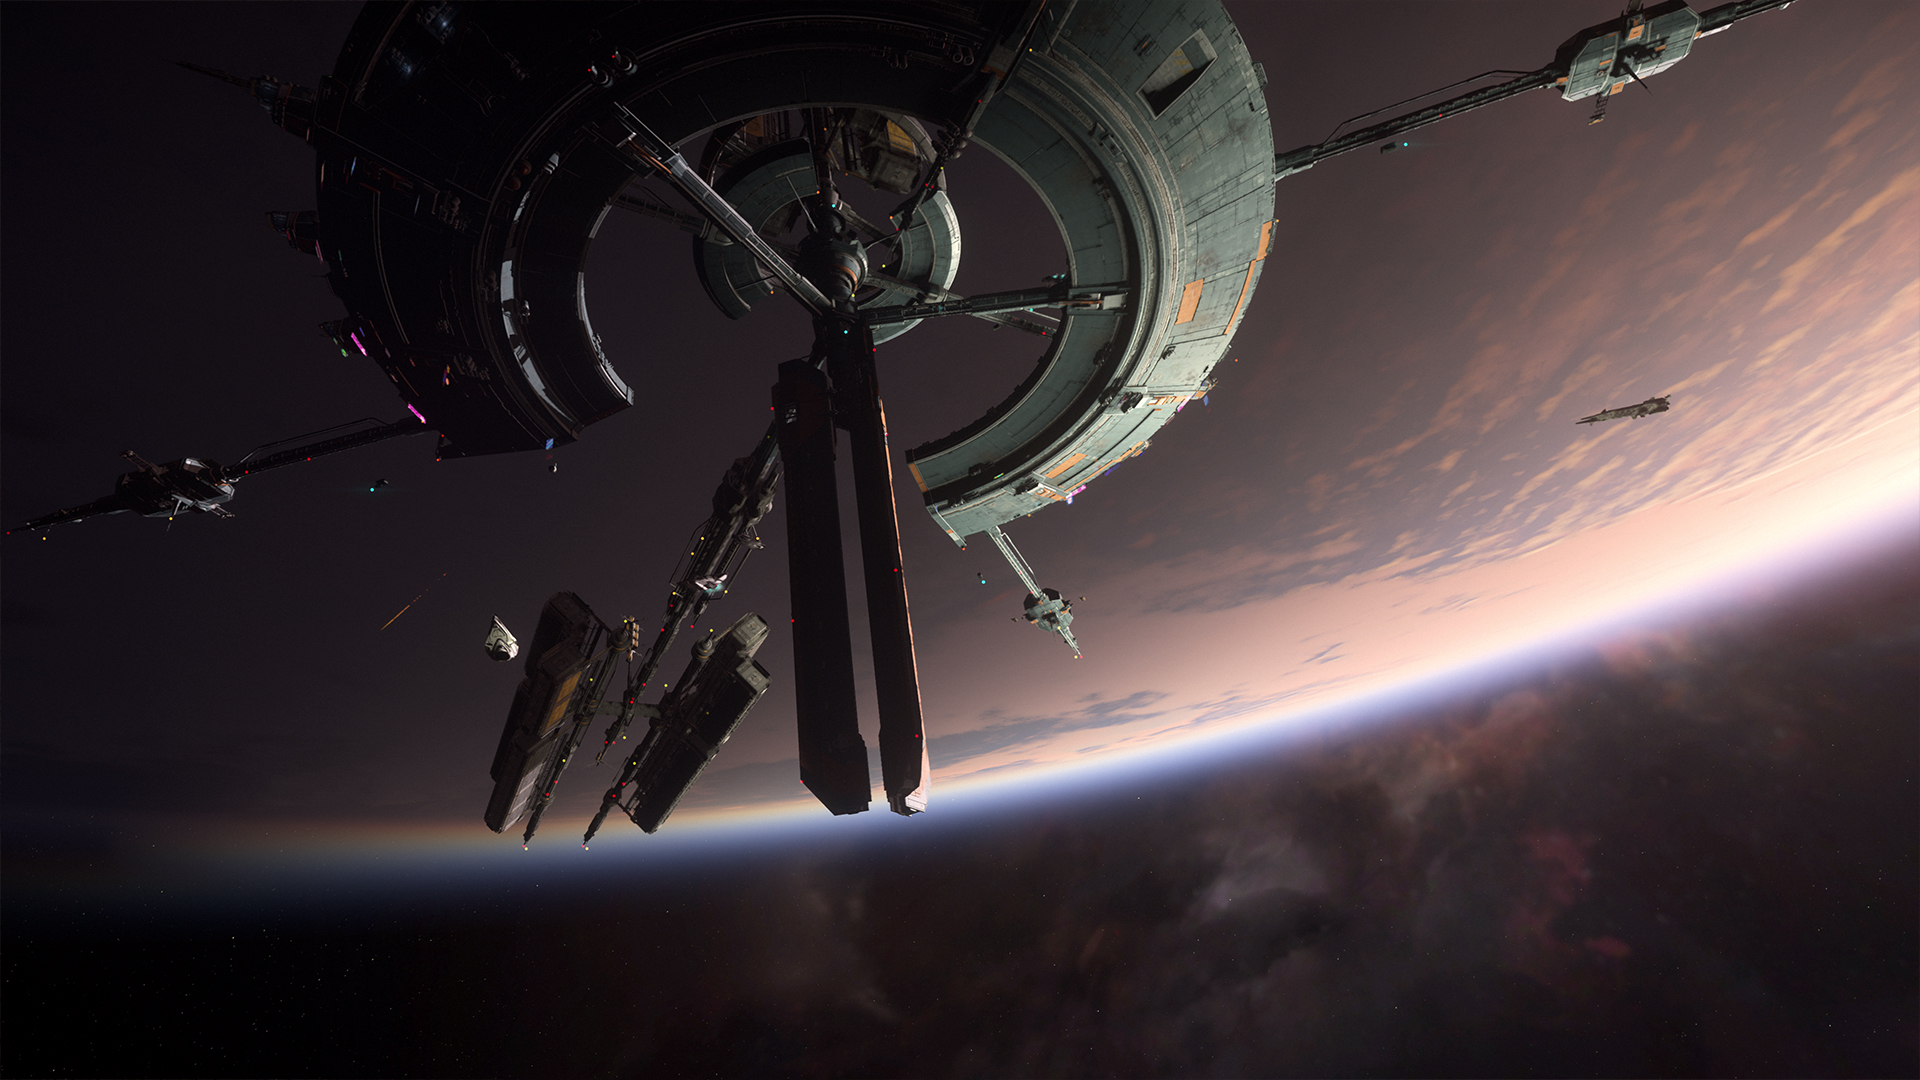 Play Star Citizen for free during Invictus Launch Week — GAMINGTREND